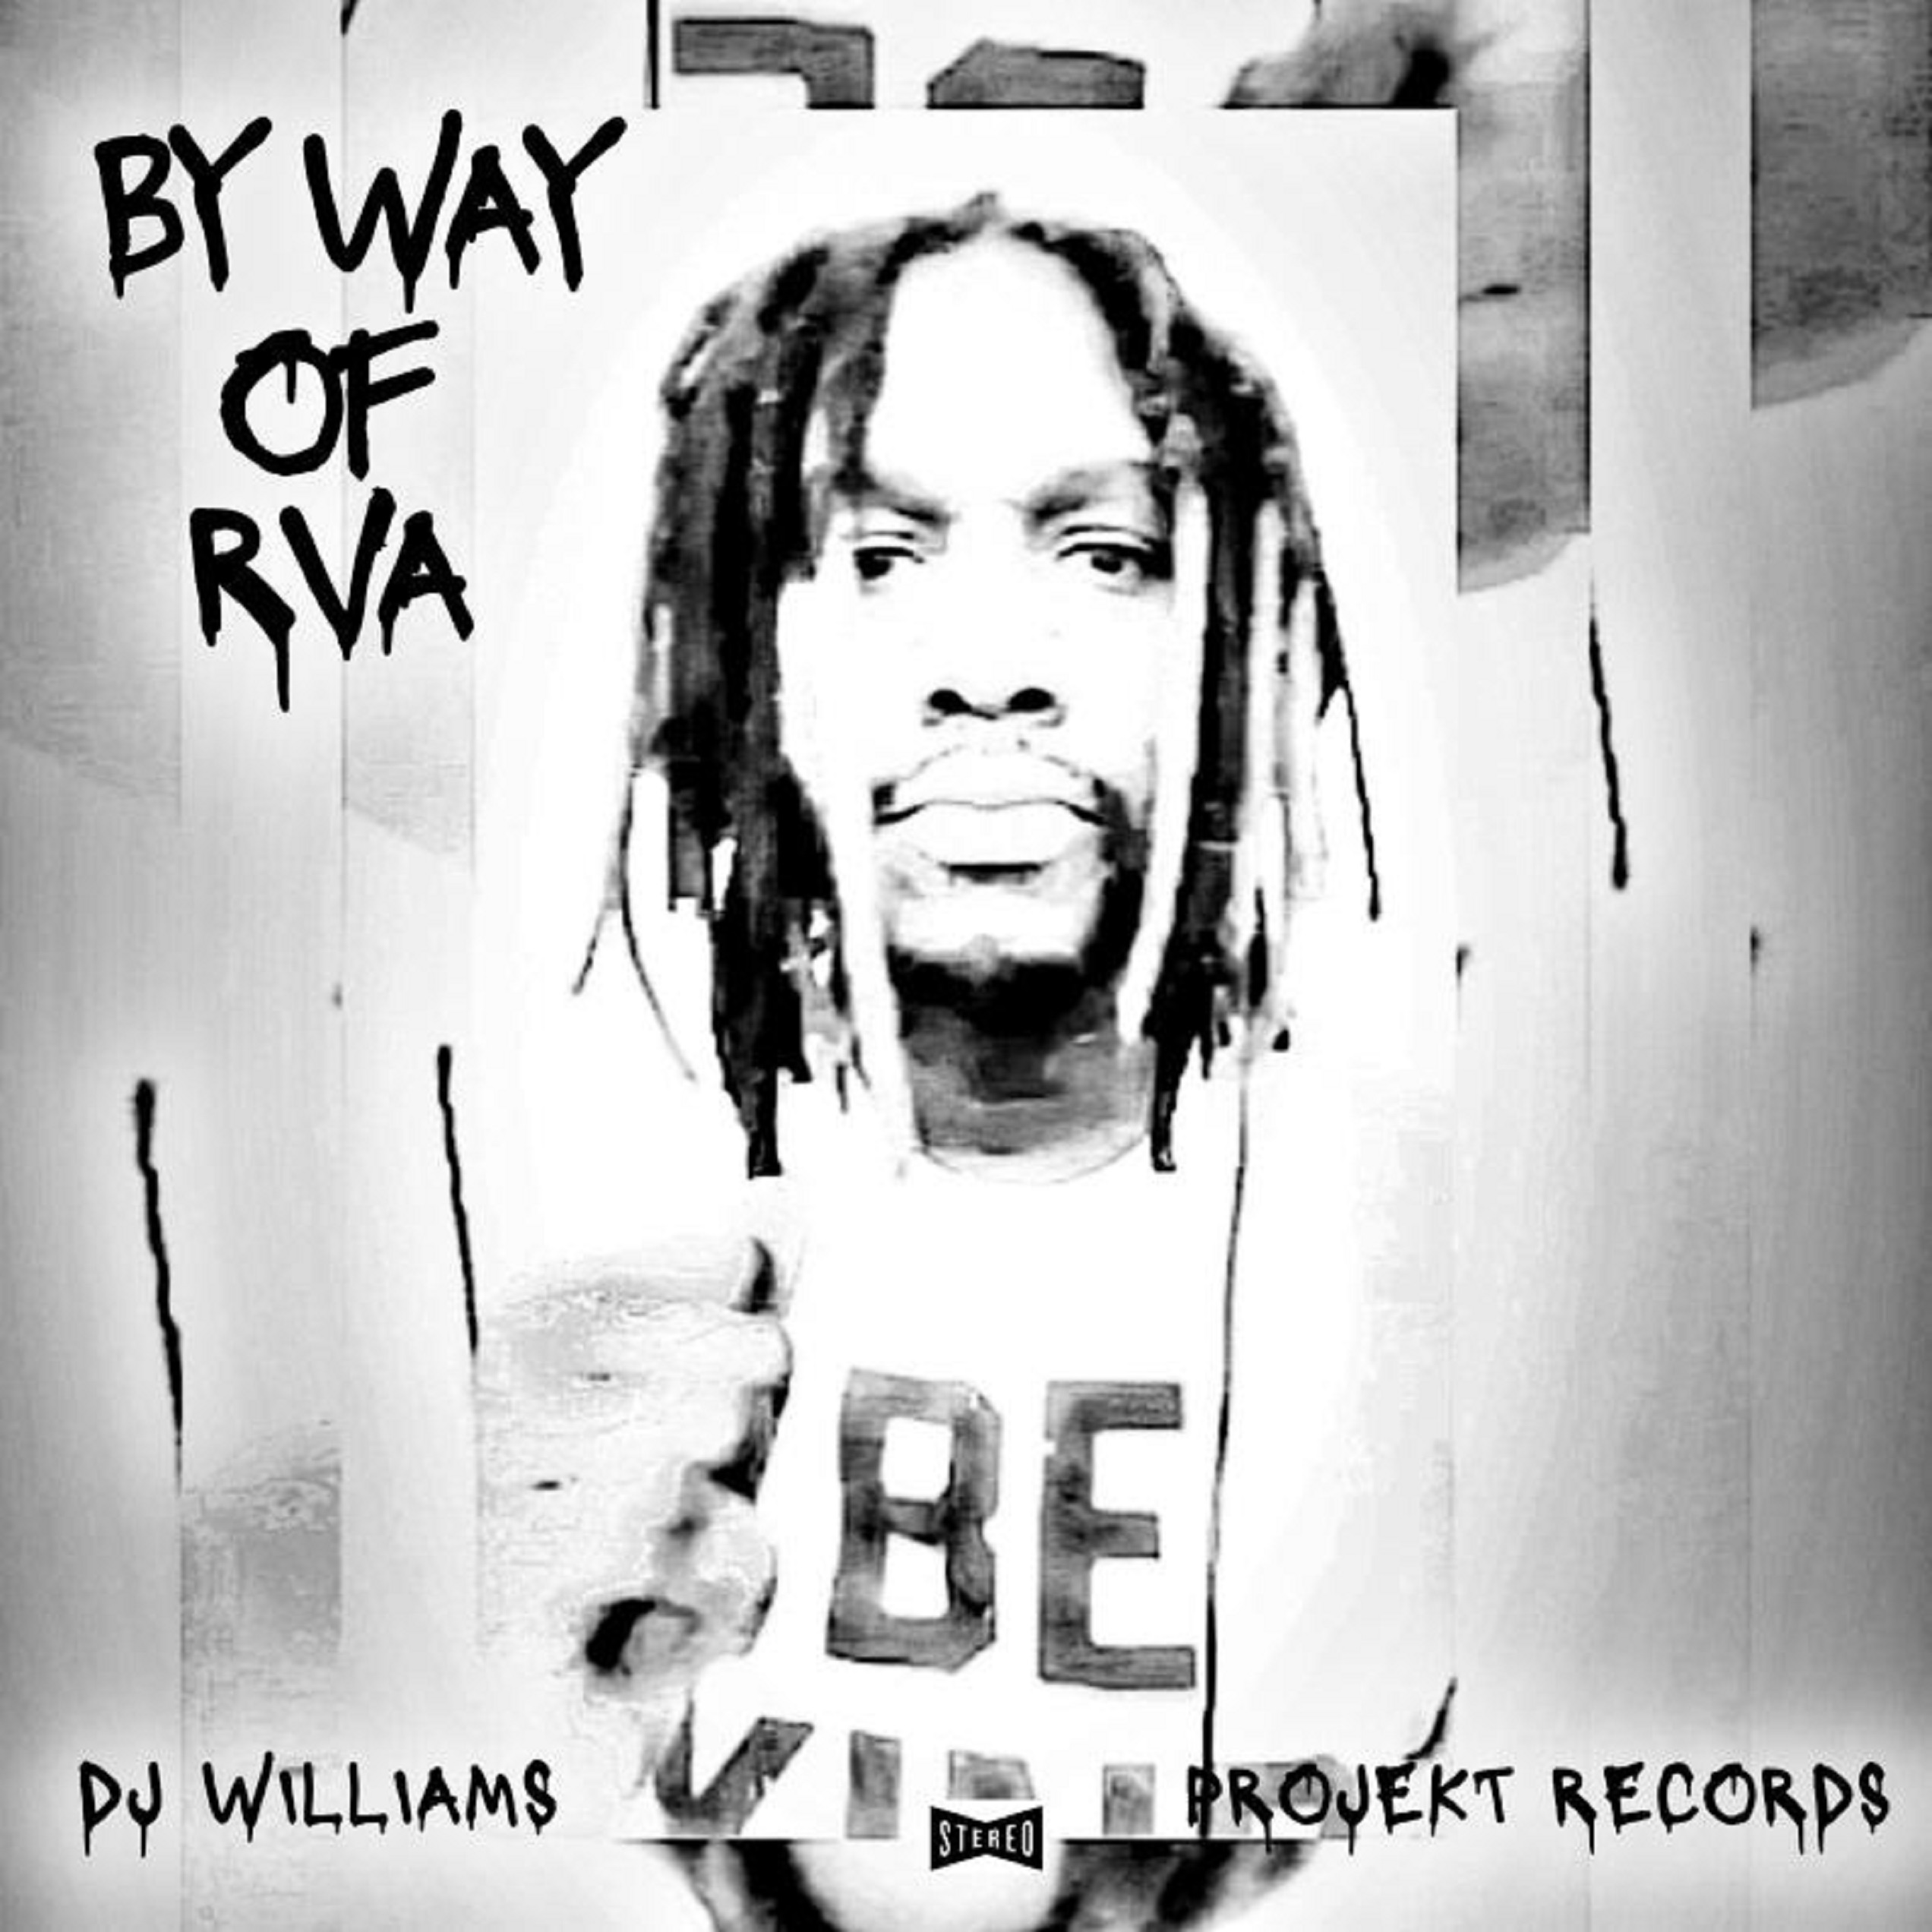 Guitar Virtuoso DJ Williams Embarks on 26-Date Solo Summer Tour, Showcasing Latest Album ‘By Way of RVA’”